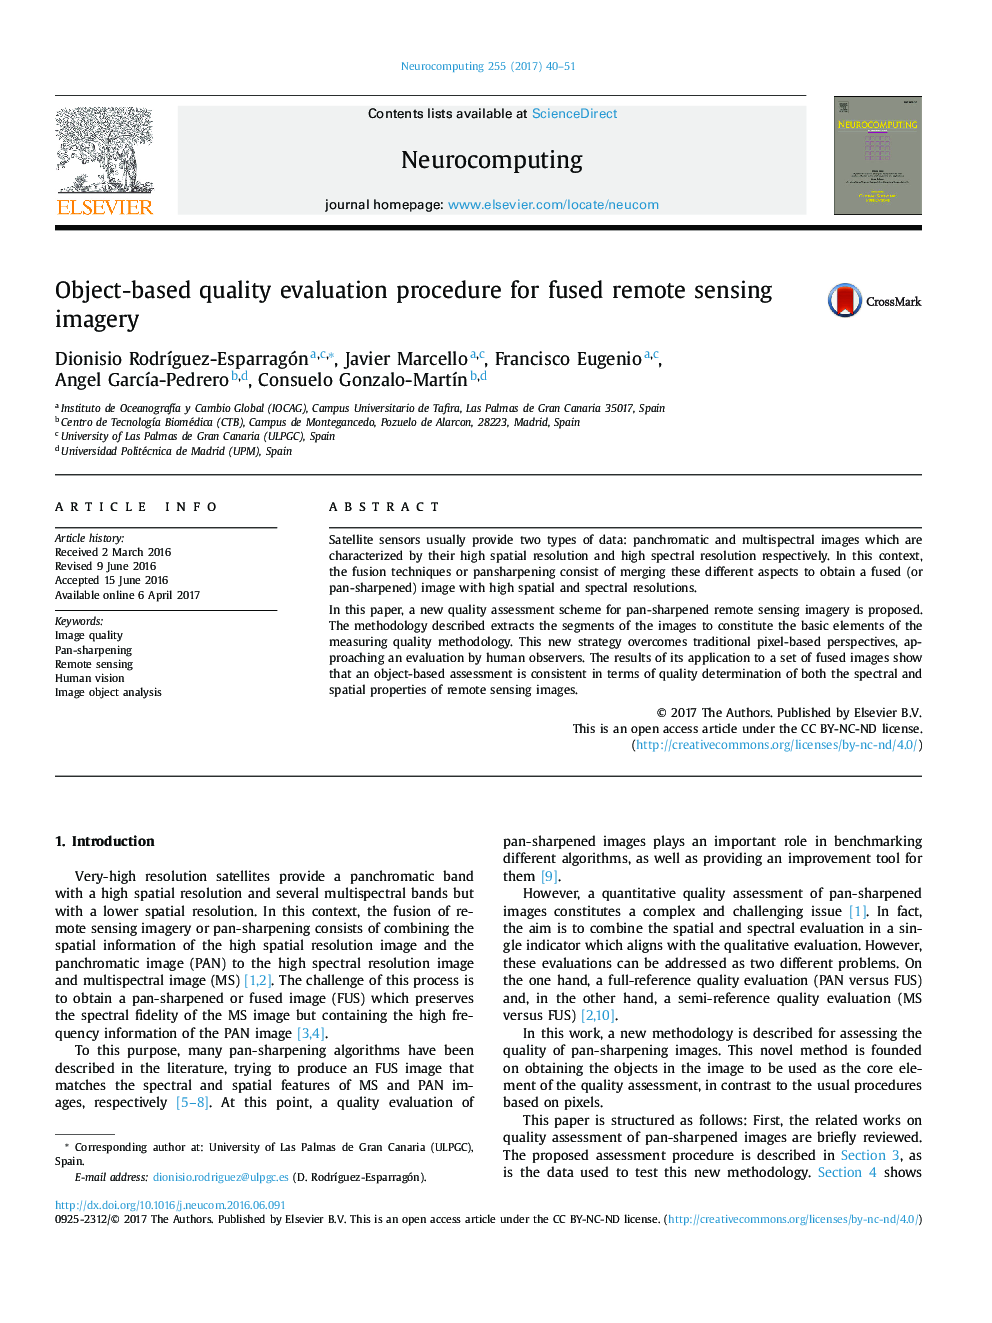 Object-based quality evaluation procedure for fused remote sensing imagery